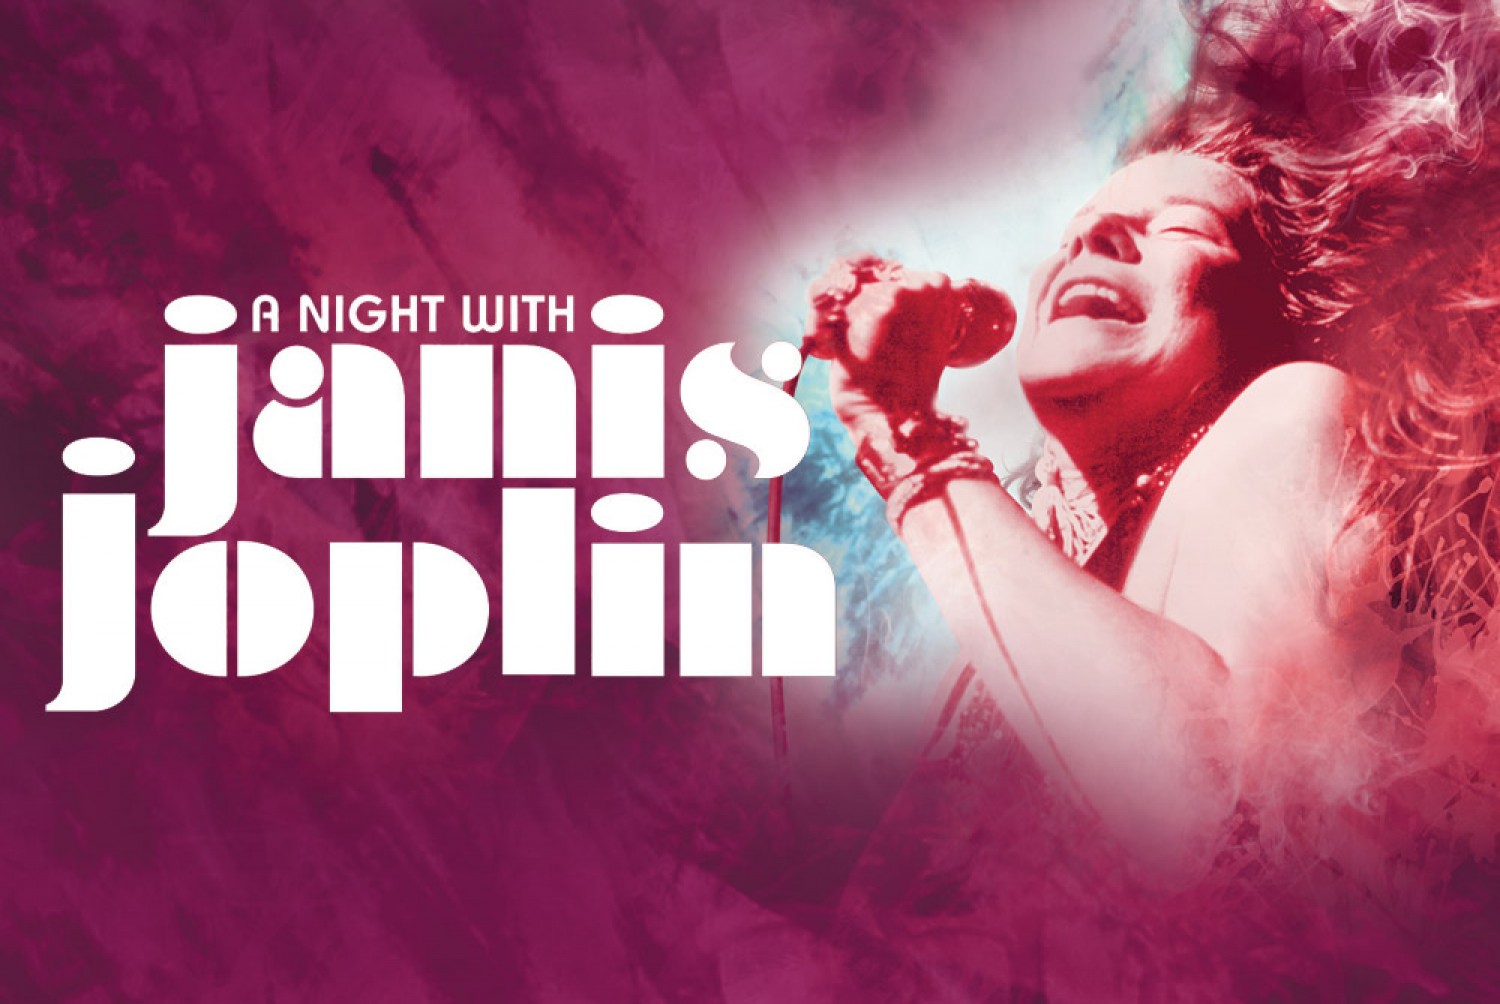 A Night with Janis Joplin @ EKU Center for the Arts